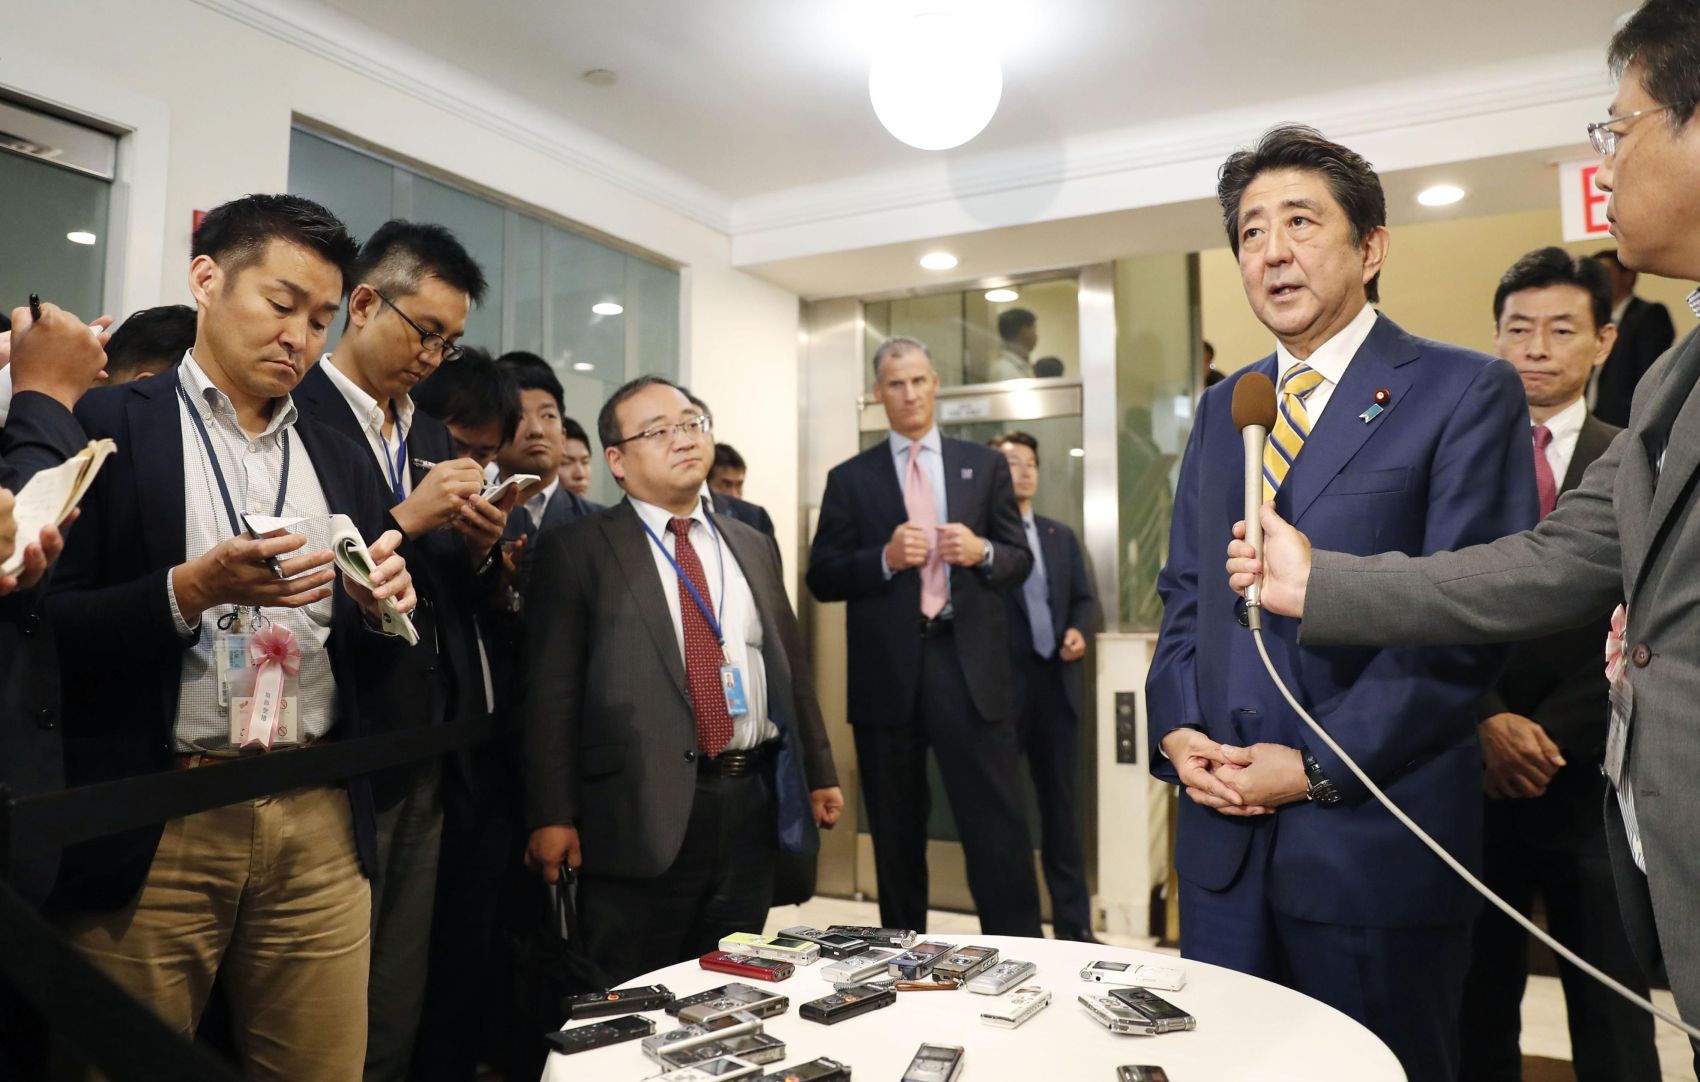 Prime Minister Abe Aims for National Referendum to Revise the Constitution